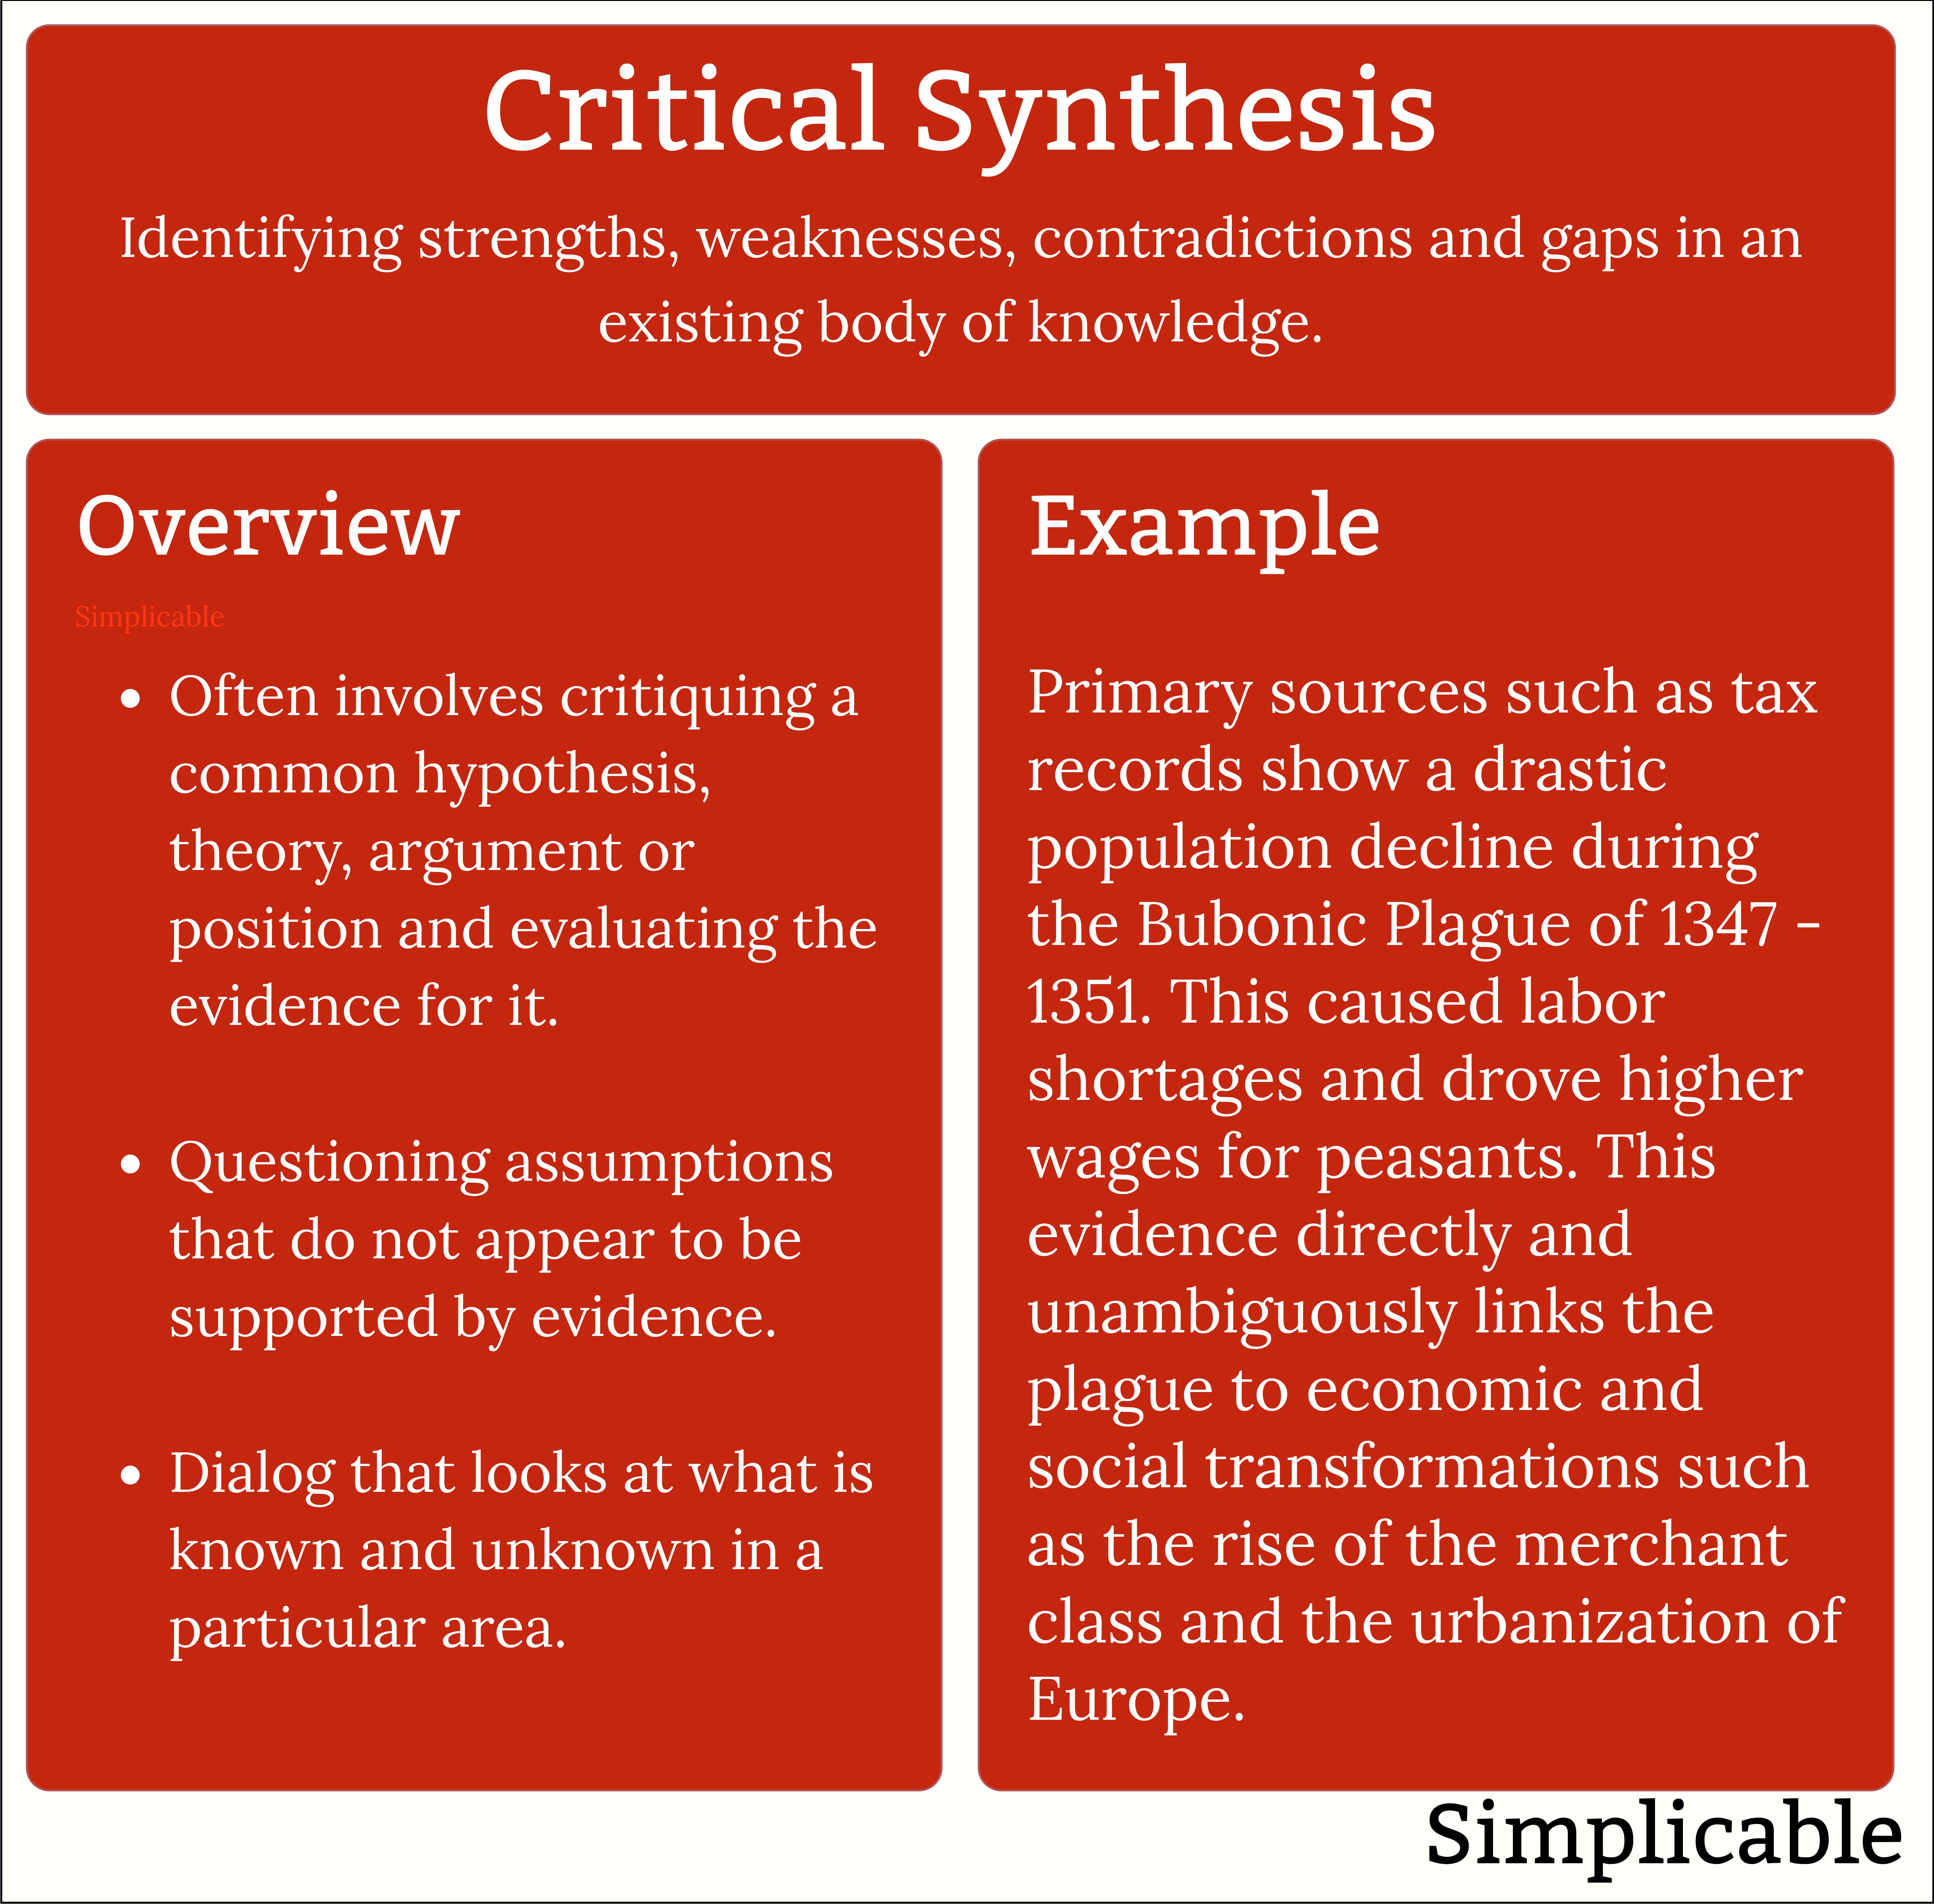 critical synthesis summary and example